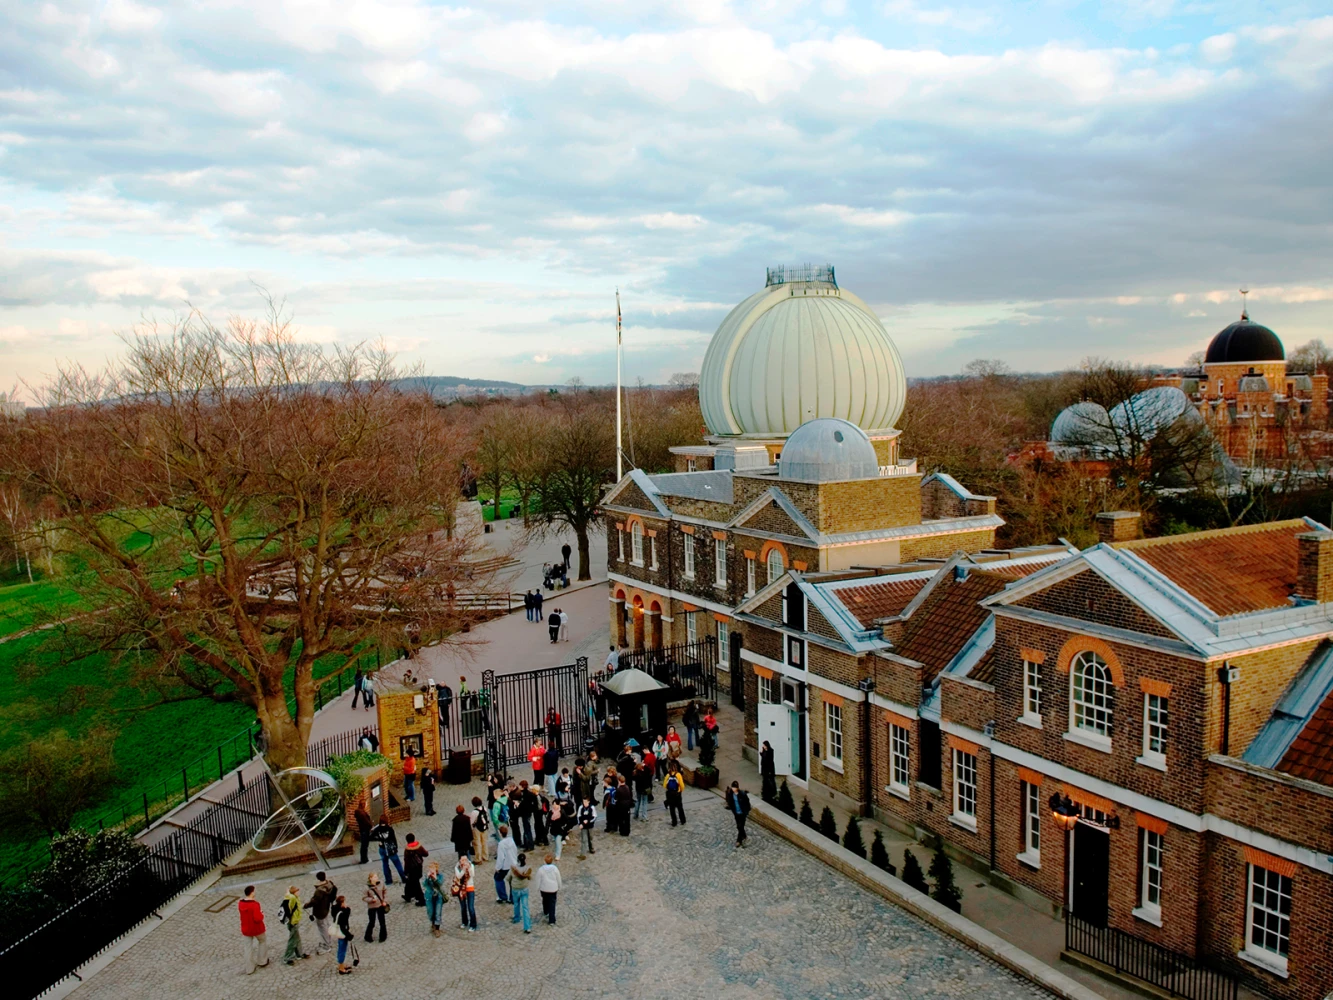 Royal Observatory: What to expect - 2